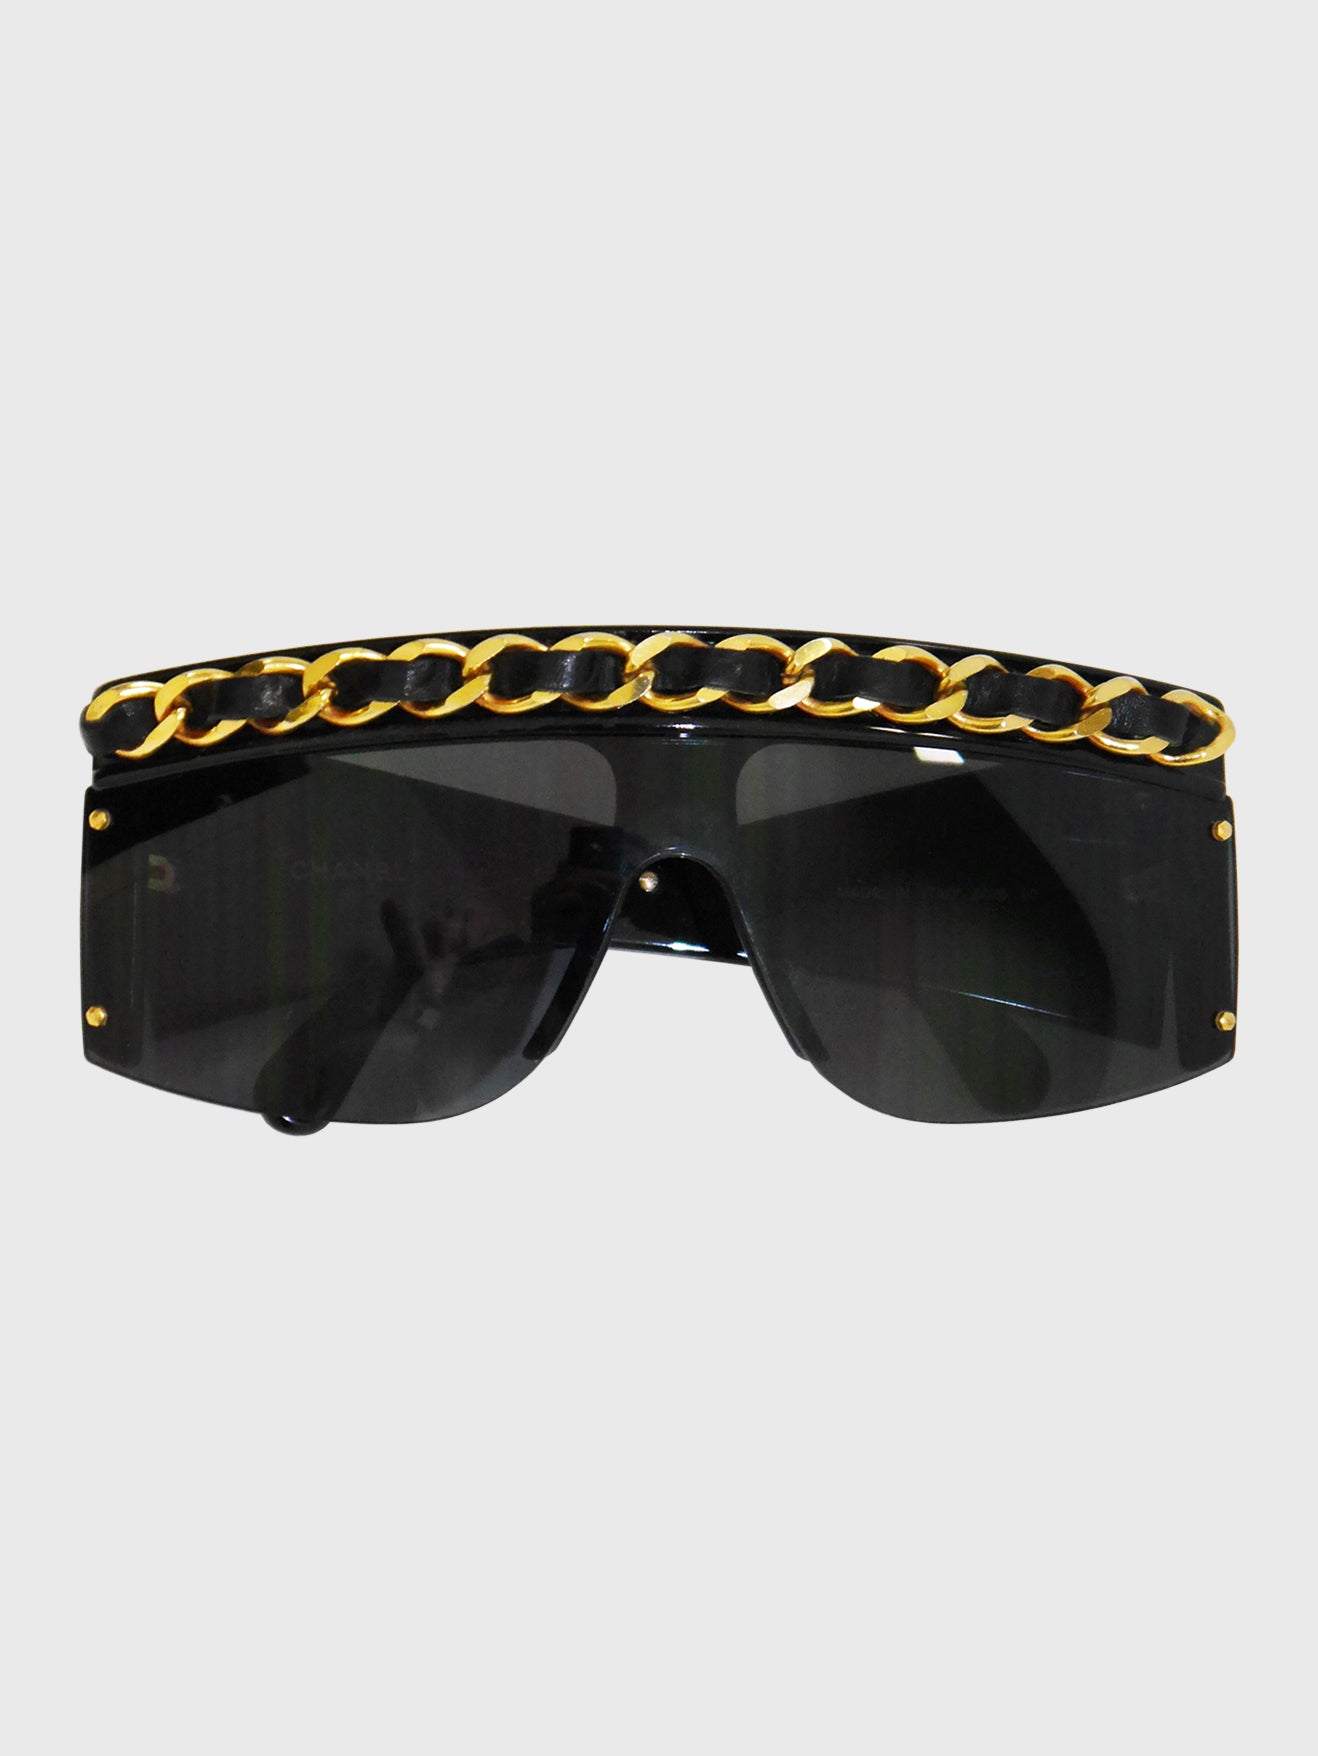 CHANEL Fall 1992 Vintage Metal Chain & Leather Sunglasses